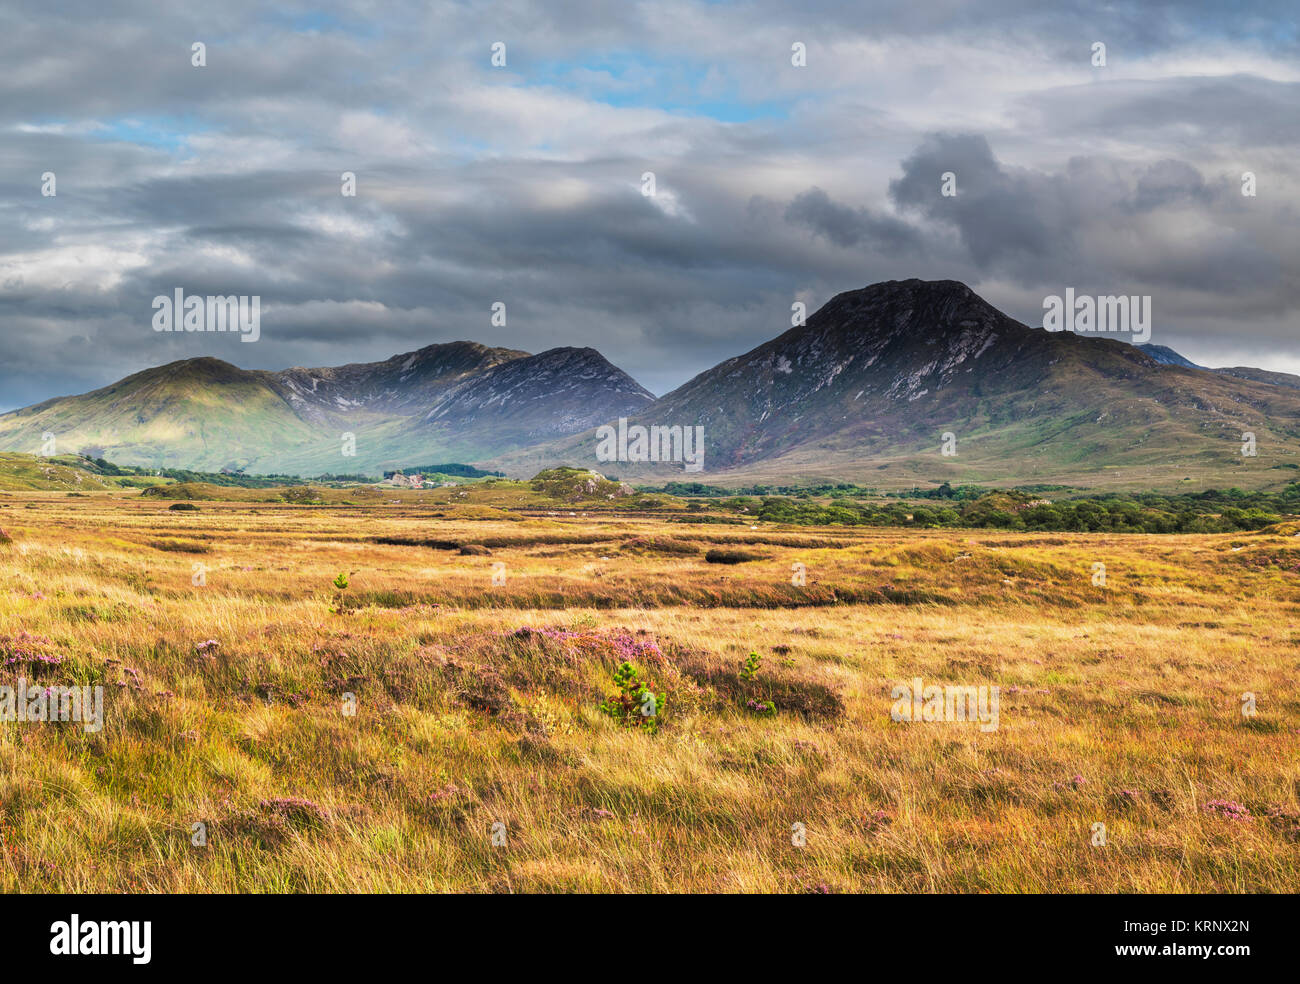 View across bog towards the Twelve Bens (Beanna Beola) mountain range of Connemara, from outside the village of Letterfrack, County Galway, Ireland Stock Photo